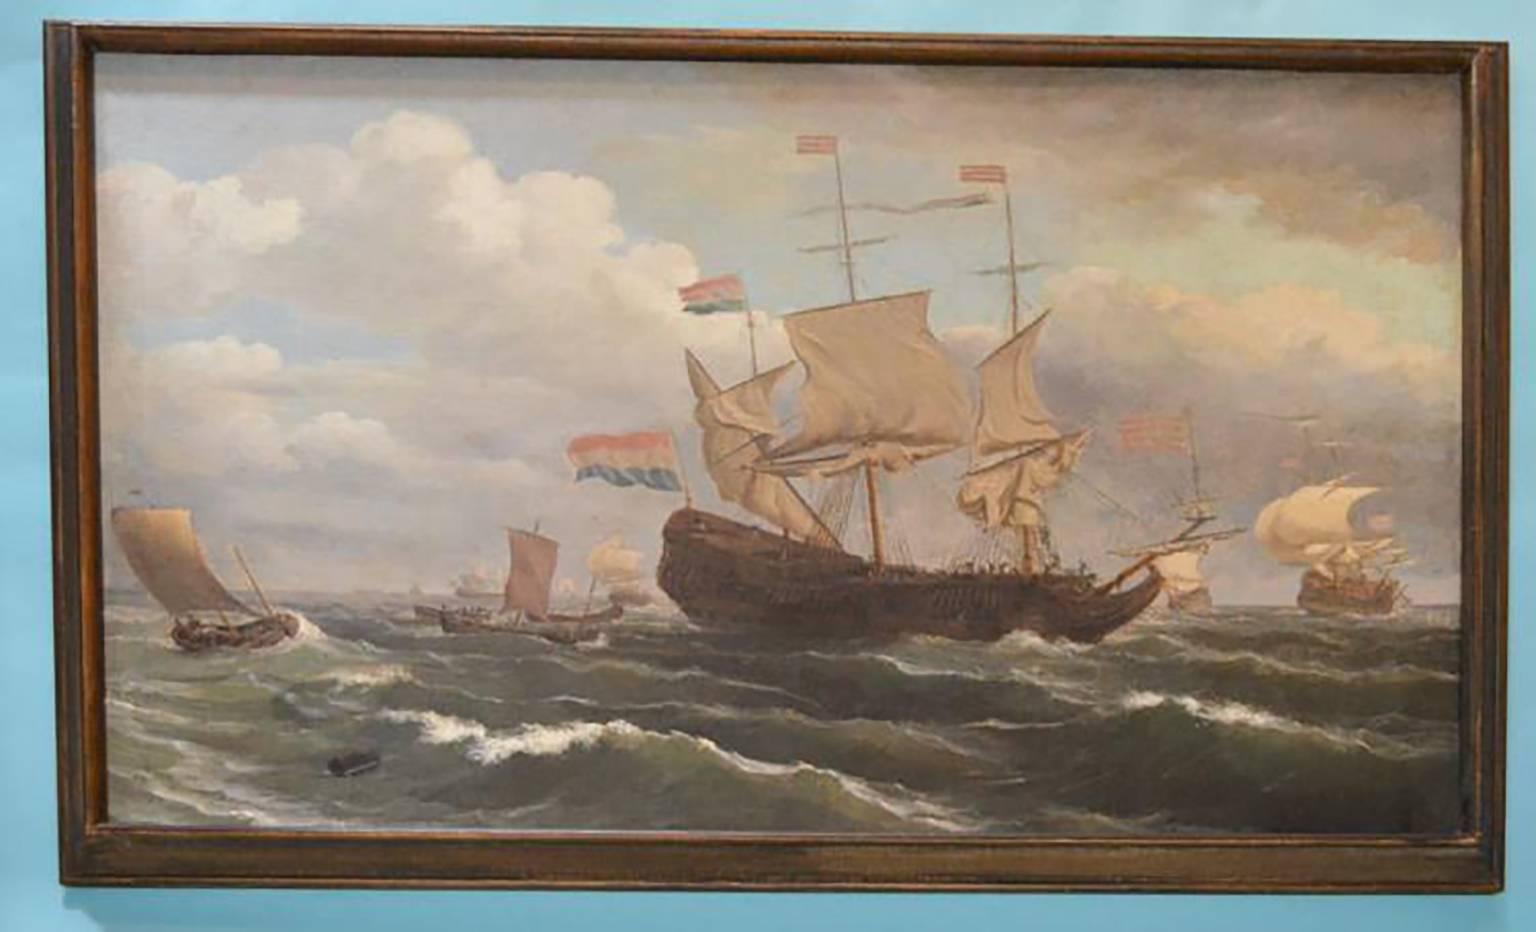 Large Nautical 19th Century Oil Painting by Louis Barnaba (Brussels, France, 1826-1892) Entitled “Nantucket”  Oil on Canvas  Signed by artist in lower right ” R E Nickerson”  Beautiful depiction of the ship Nantucket  Circa 1875  Housed in gold